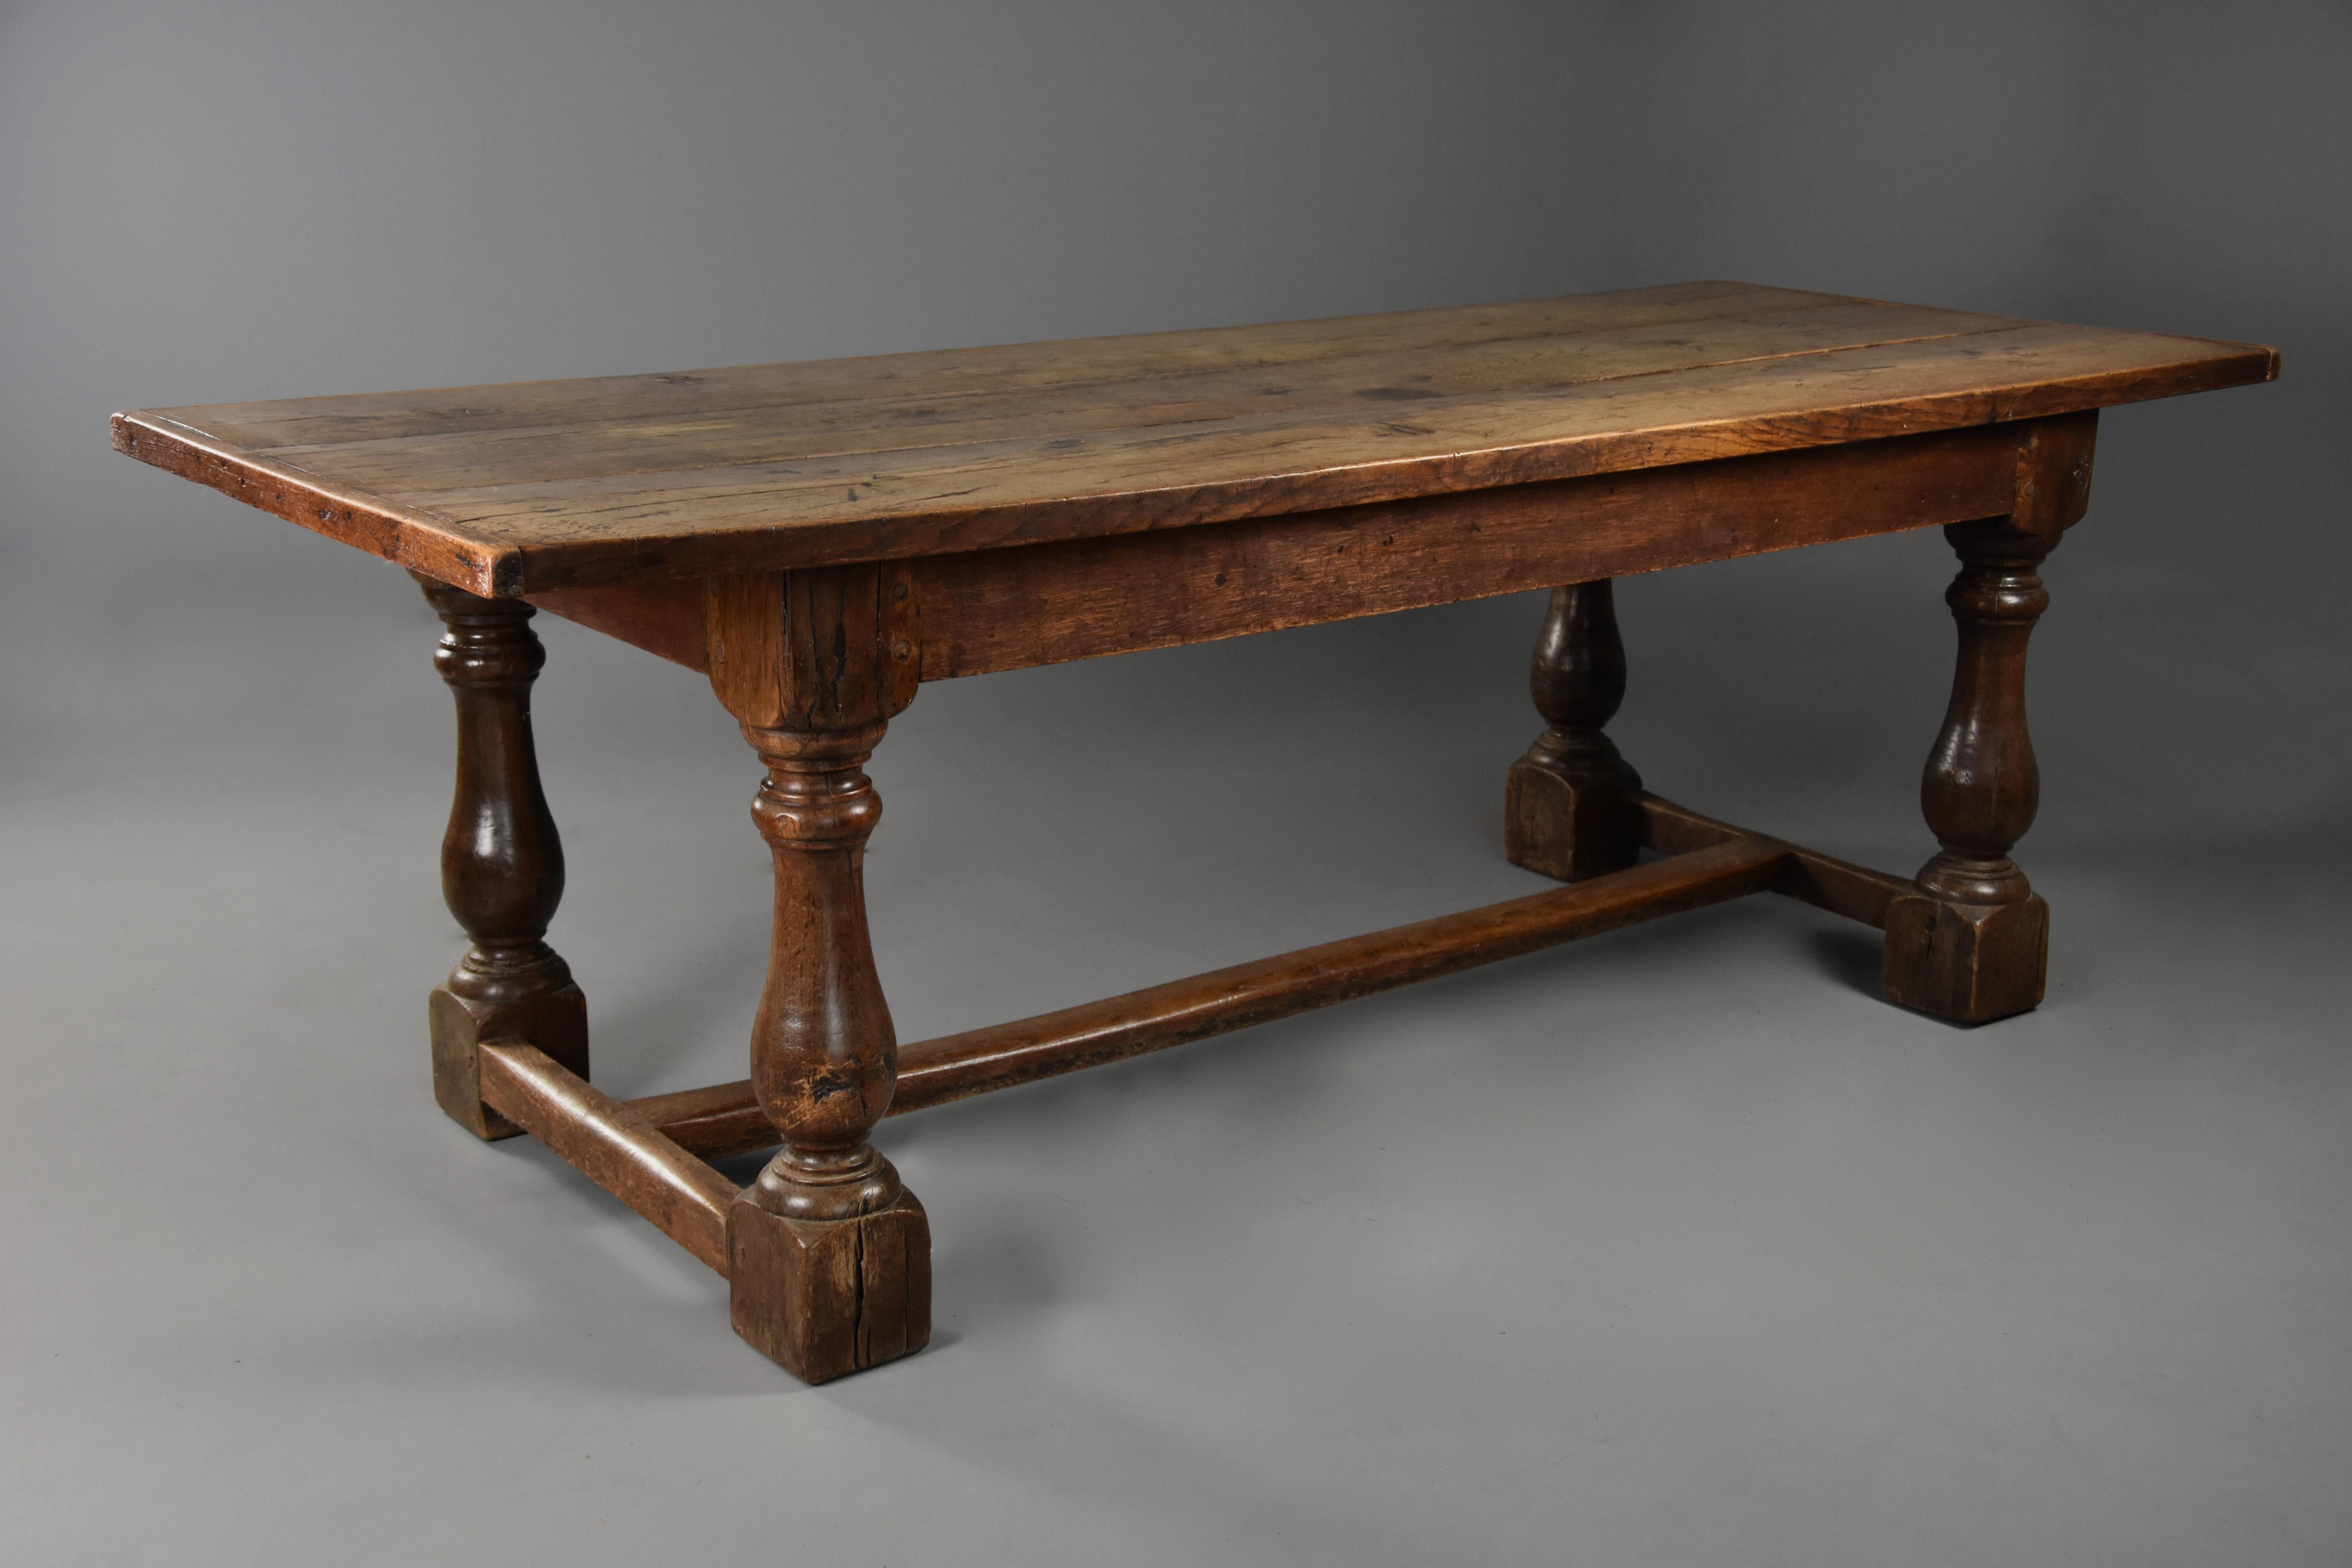 A superb late 19th century Arts & Crafts oak refectory table with fine faded patina (color).

This table consists of a three plank solid oak removable top of superb faded patina with cleated ends.

This leads down to the base which consists of